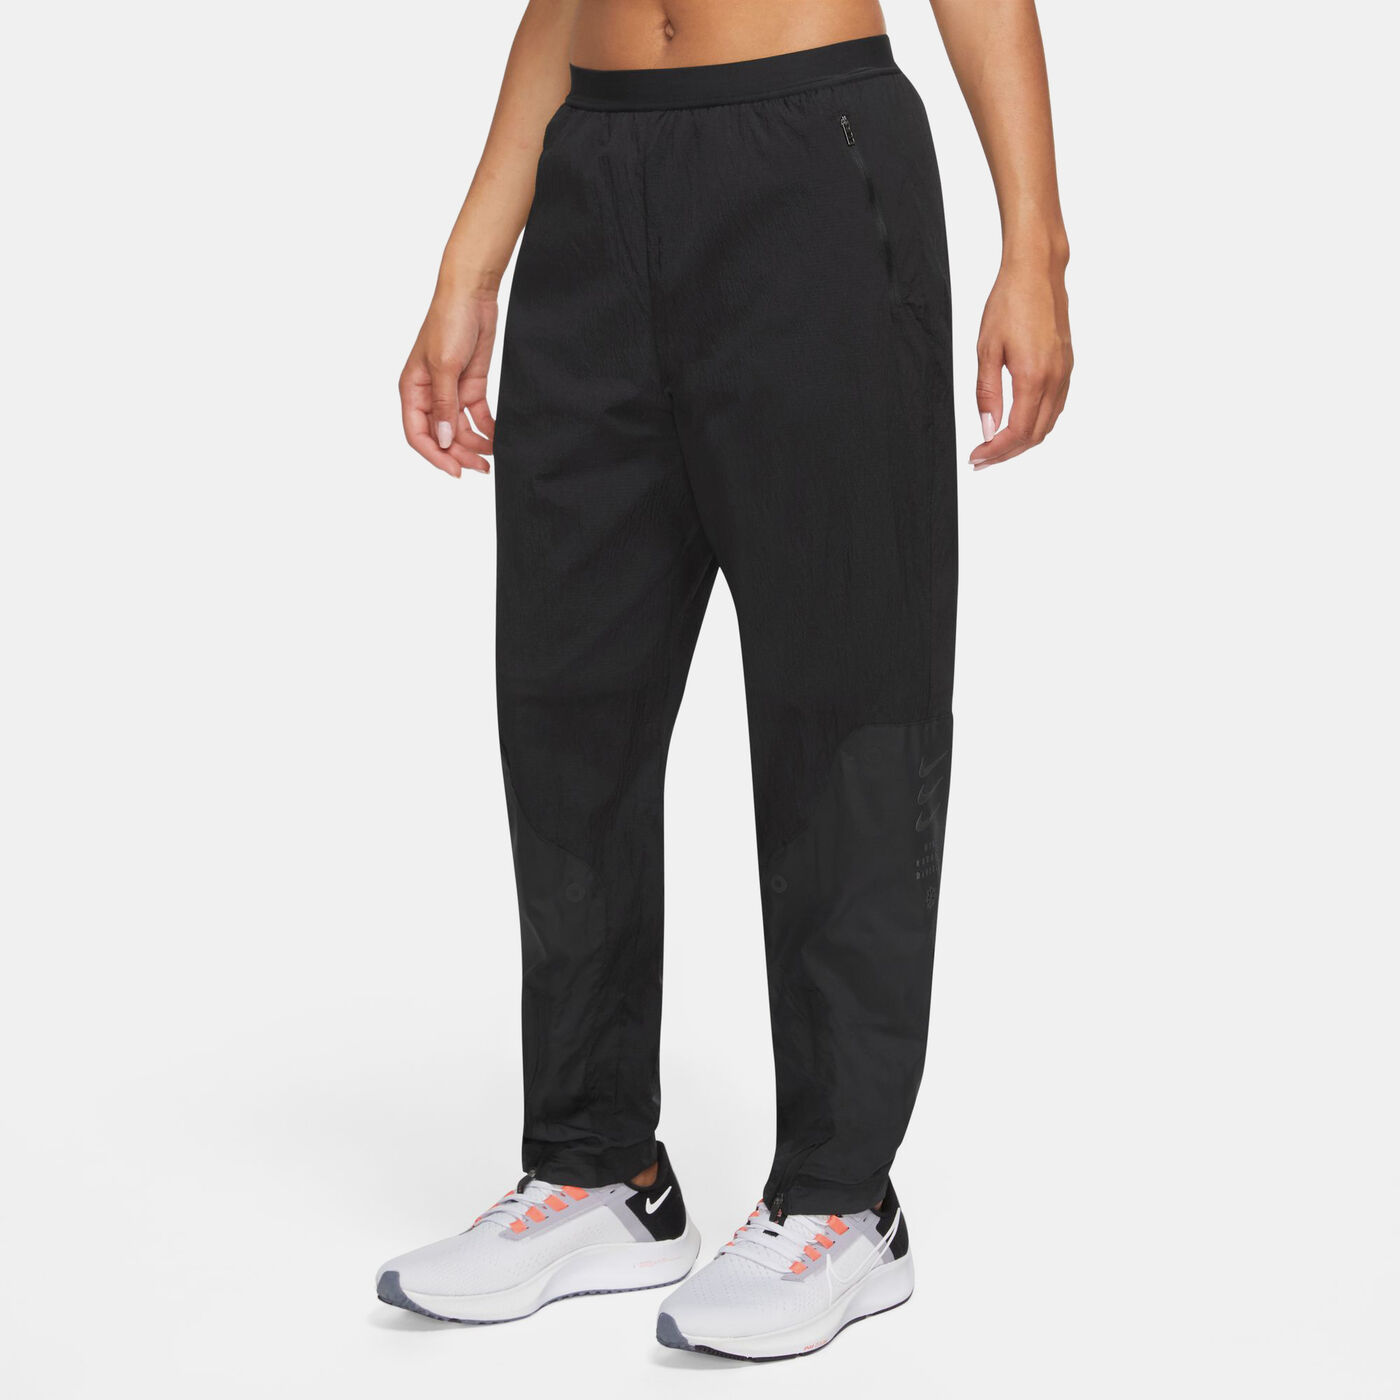 Women's Therma-FIT Run Division Pants